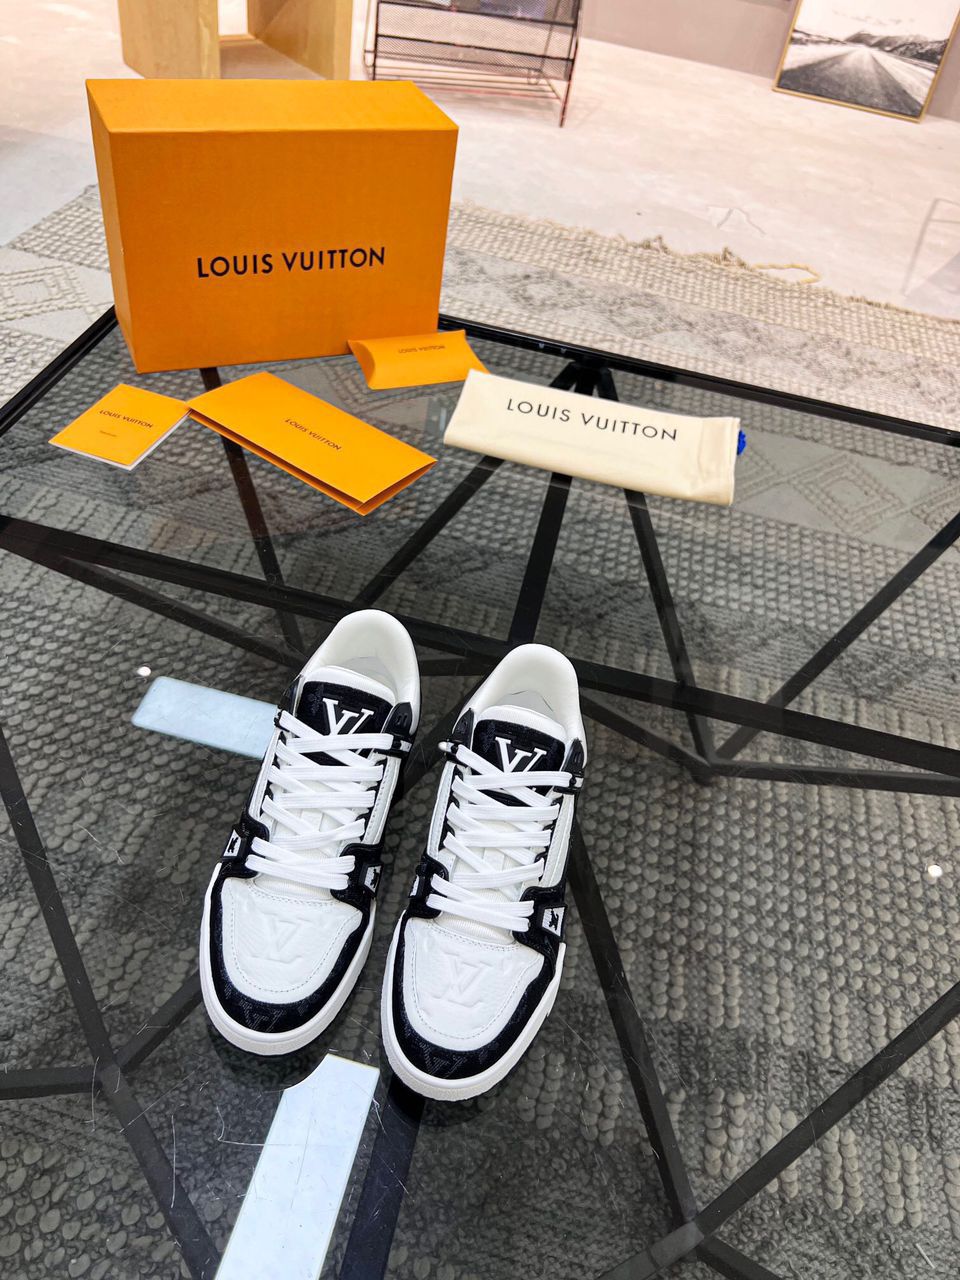 LV Trainer Shoes Black And White Size 12 for Sale in Lawrence, MA